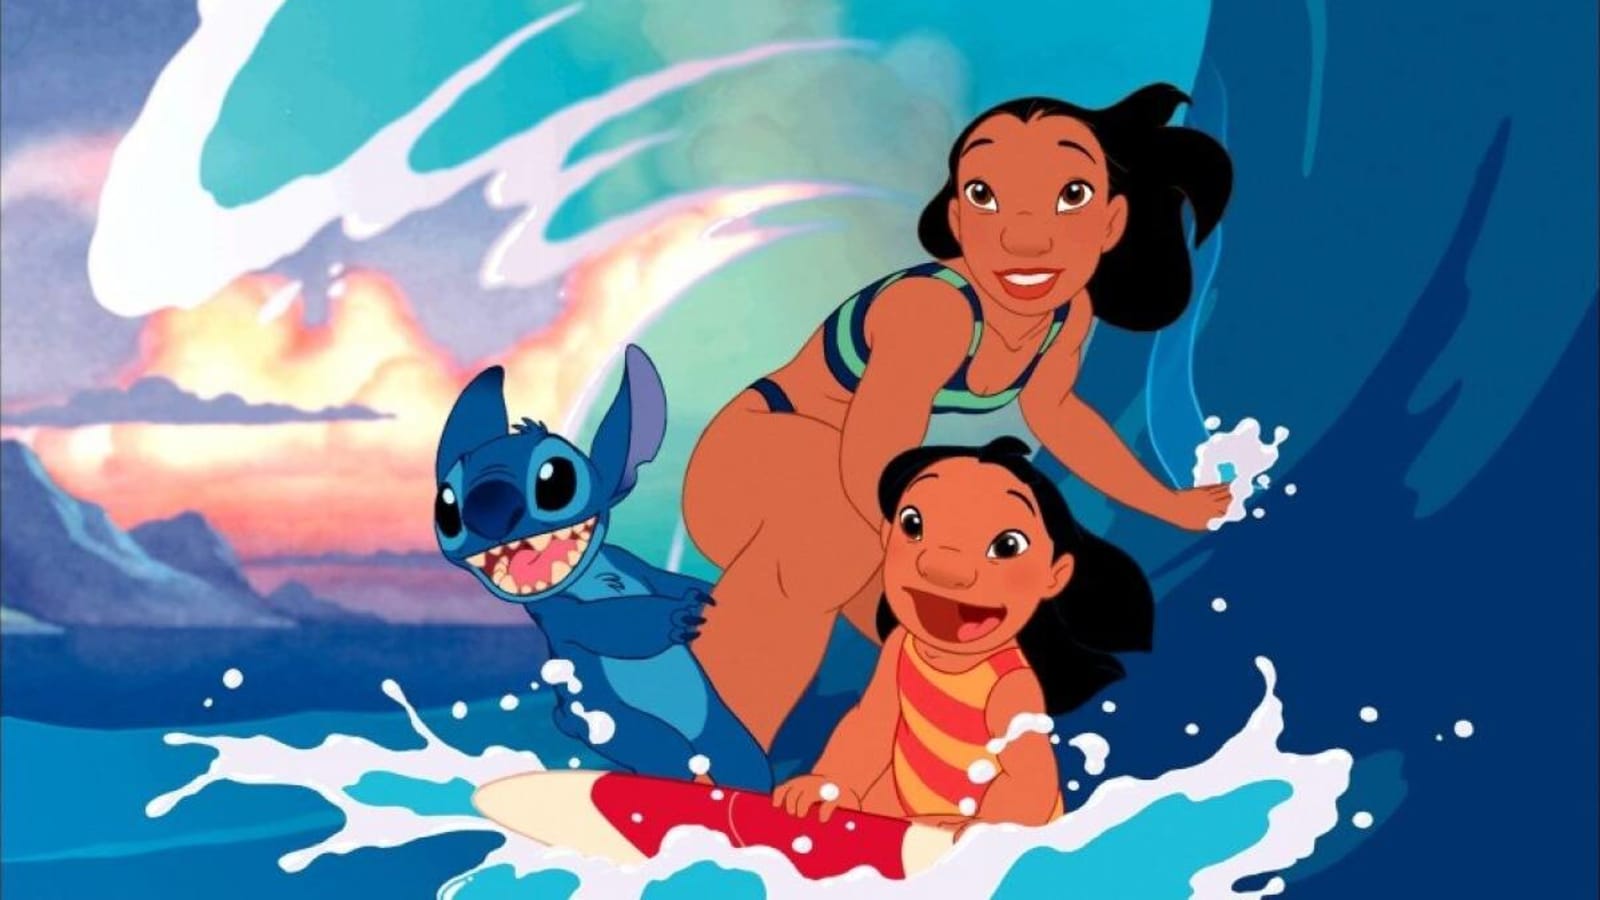 20 facts you might not know about 'Lilo & Stitch'